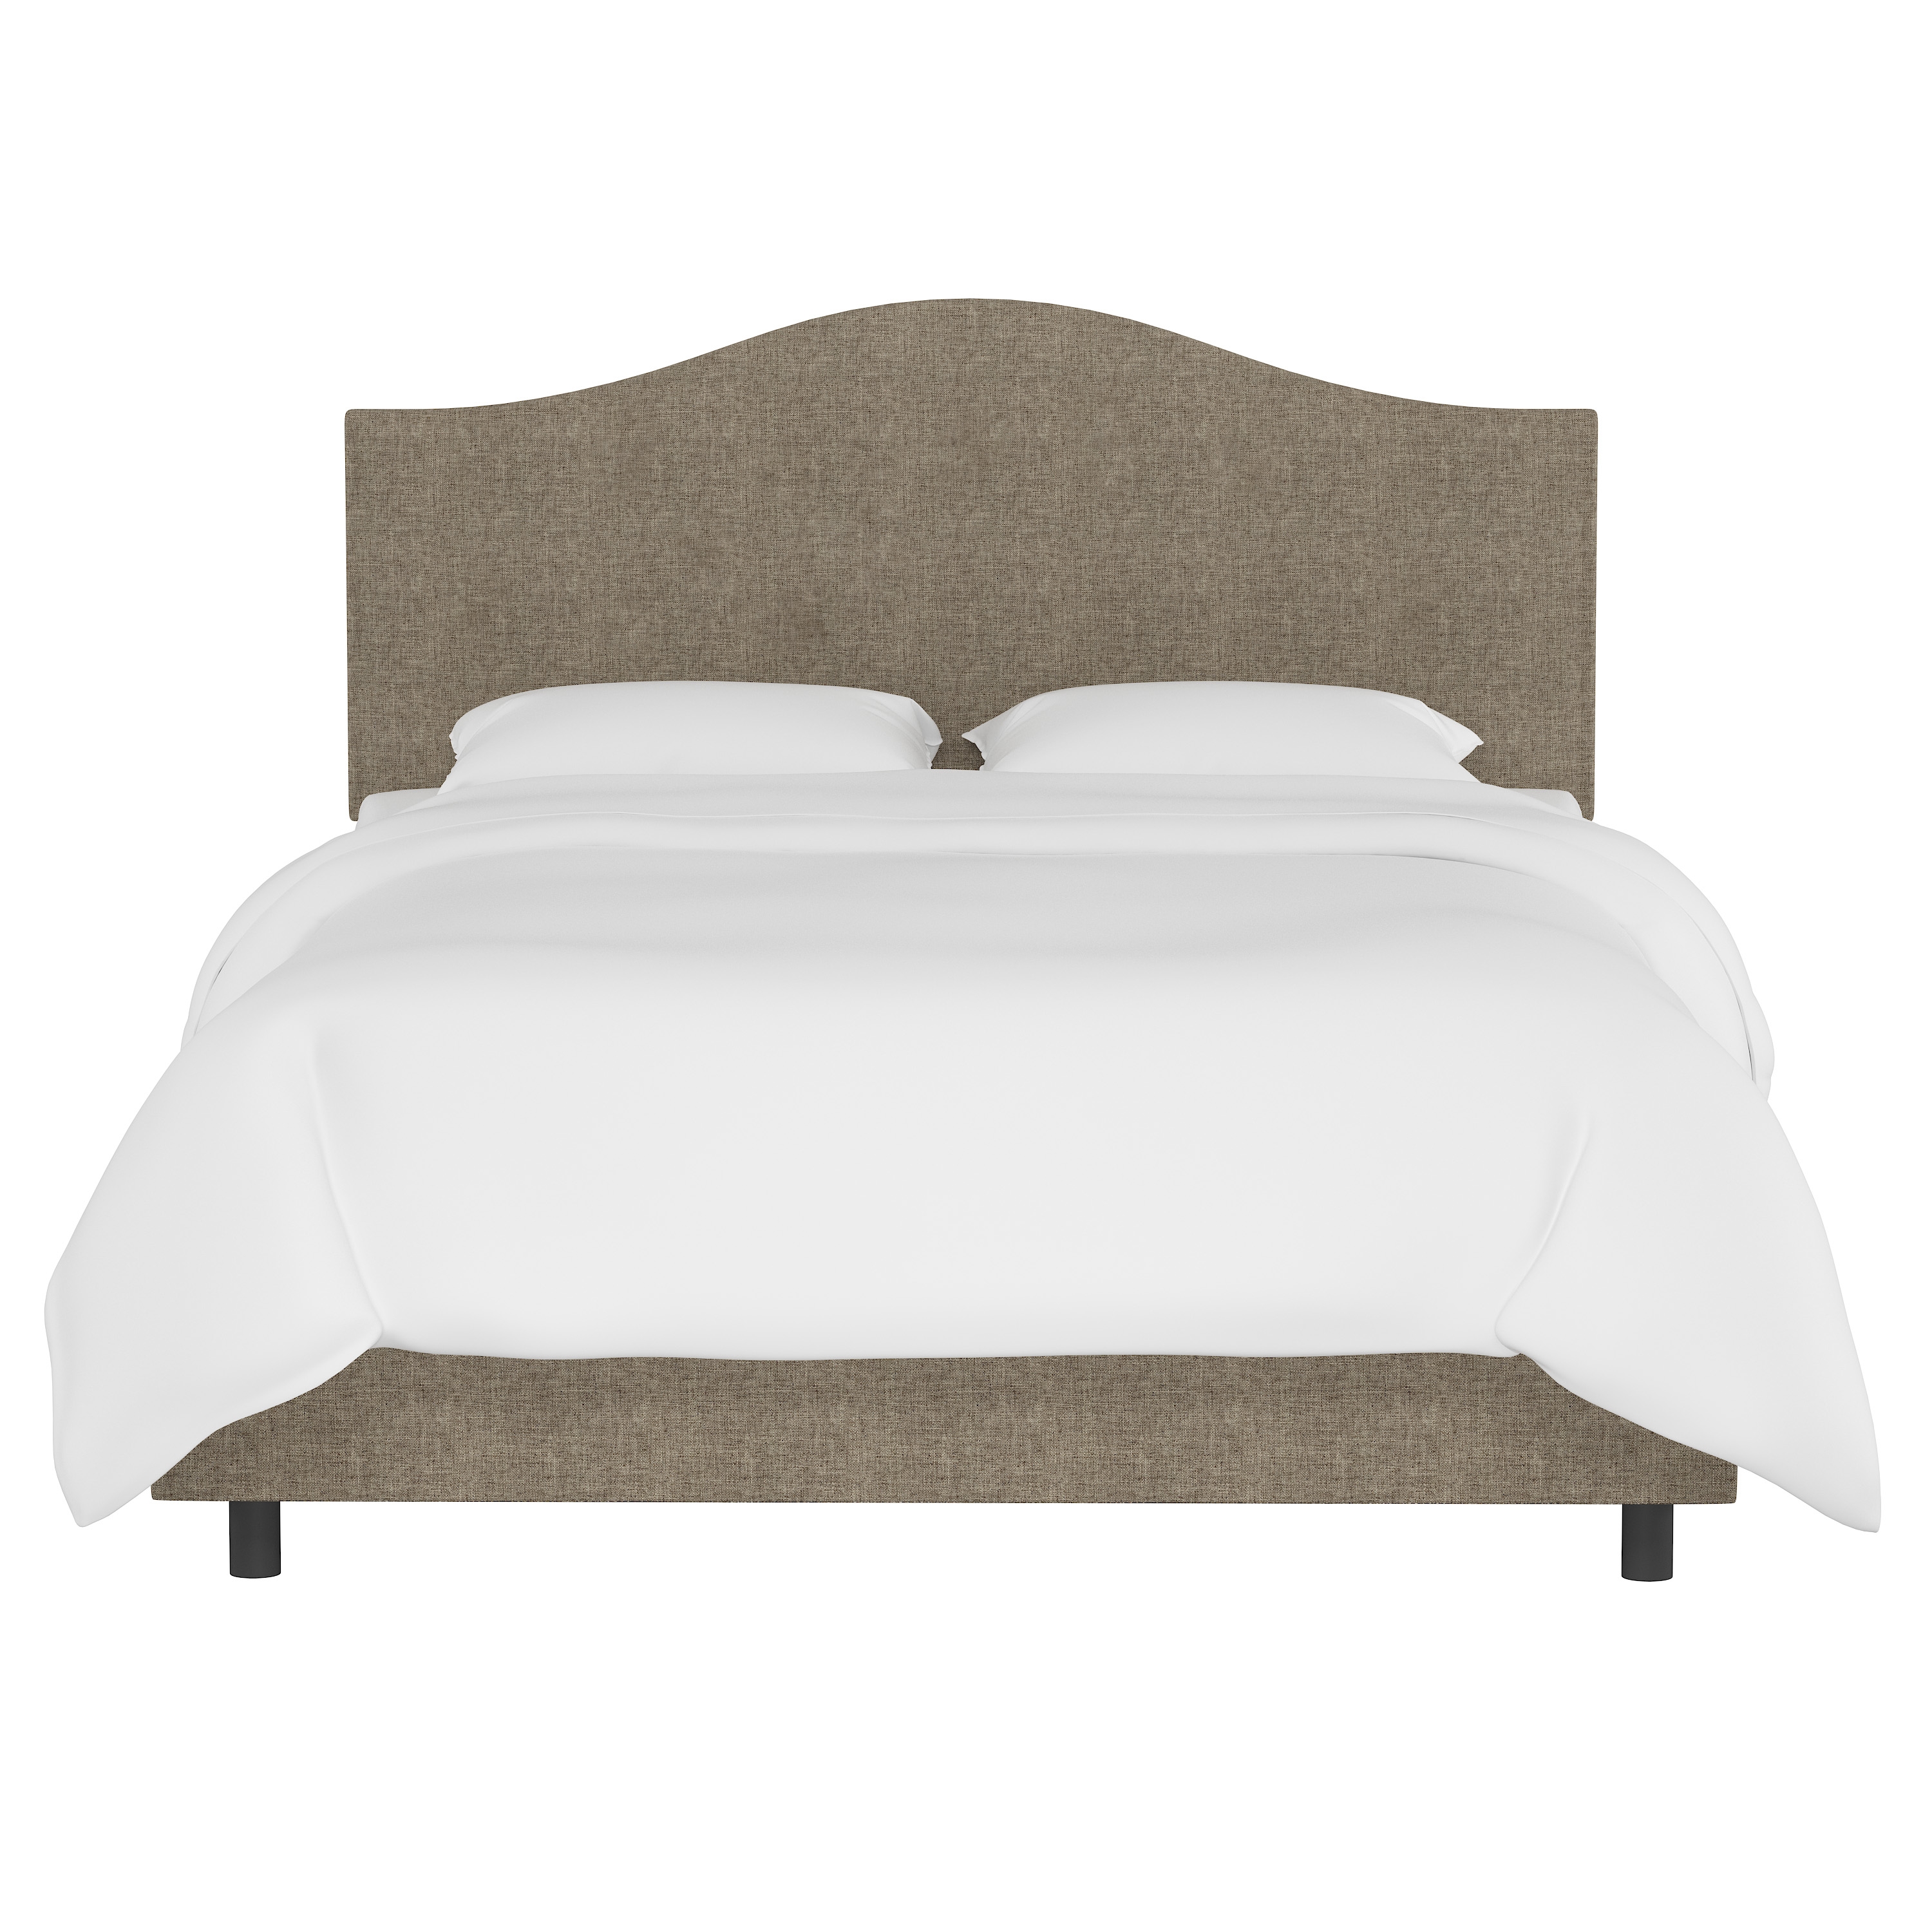 King Kenmore Bed in Zuma Linen - Image 1